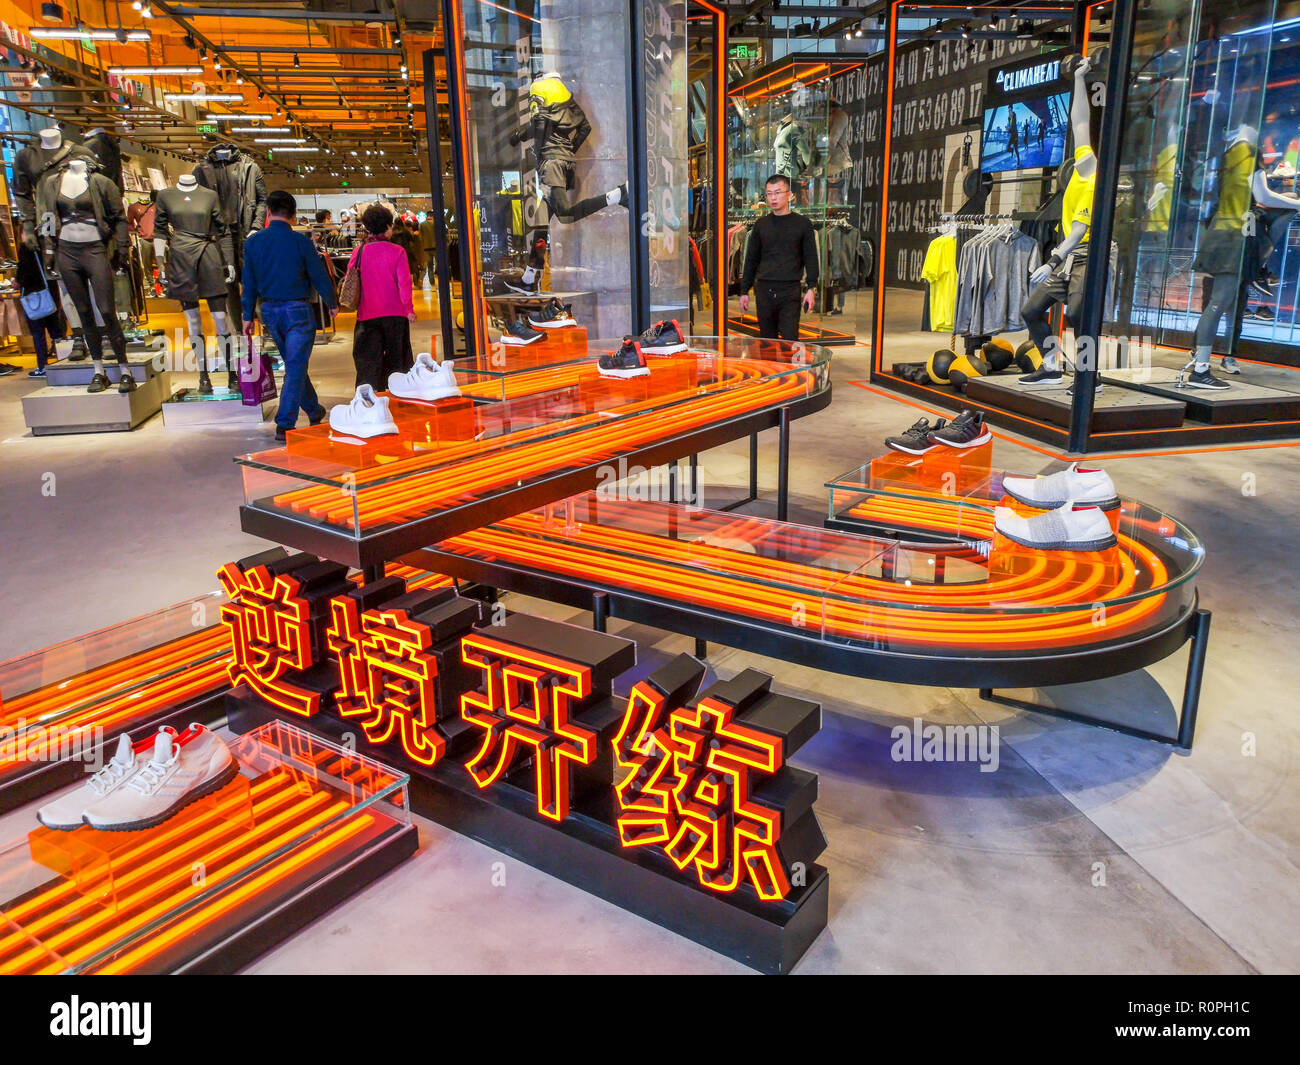 Shanghai, China. 6th Nov, 2018. Clothing and shoes on display at The Adidas Brand Center Adidas Flagship Store opening in Shanghai. Credit: SIPA Asia/ZUMA Wire/Alamy Live News Stock Photo